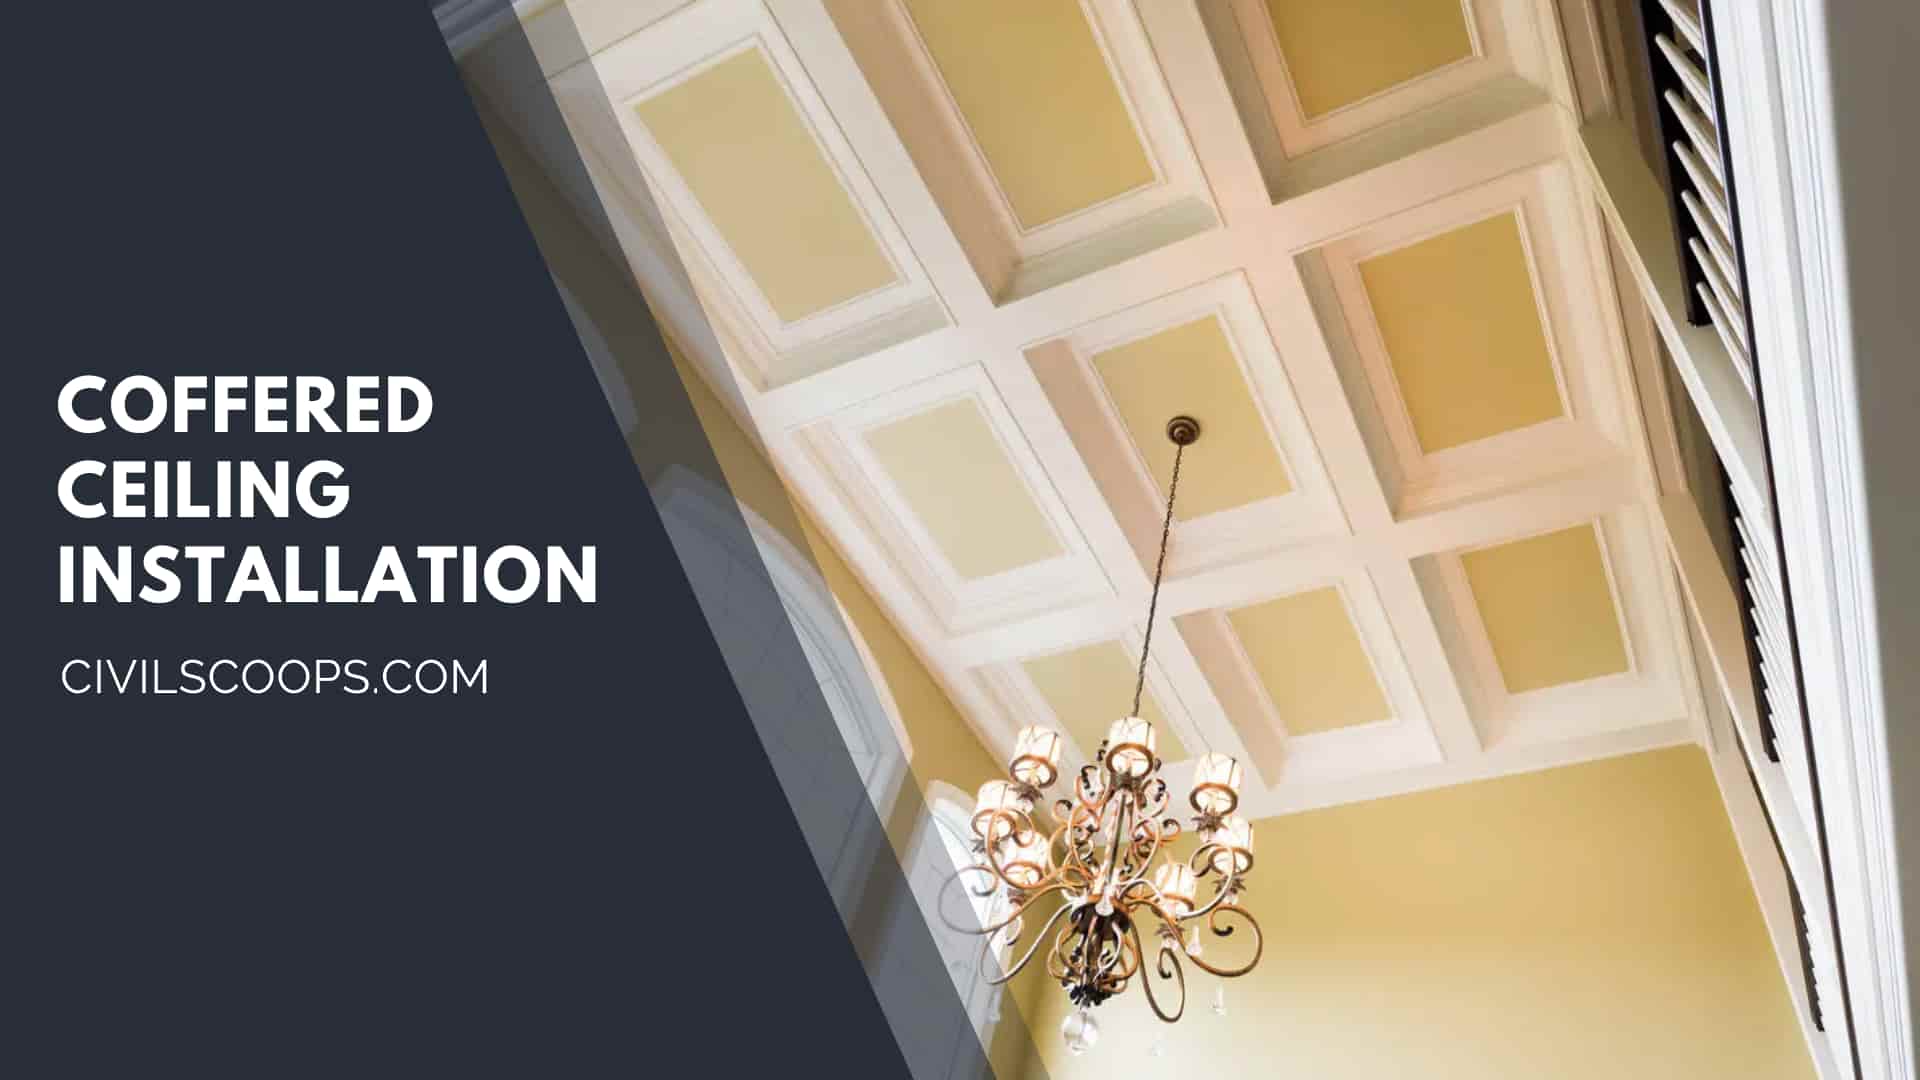 Coffered Ceiling Installation